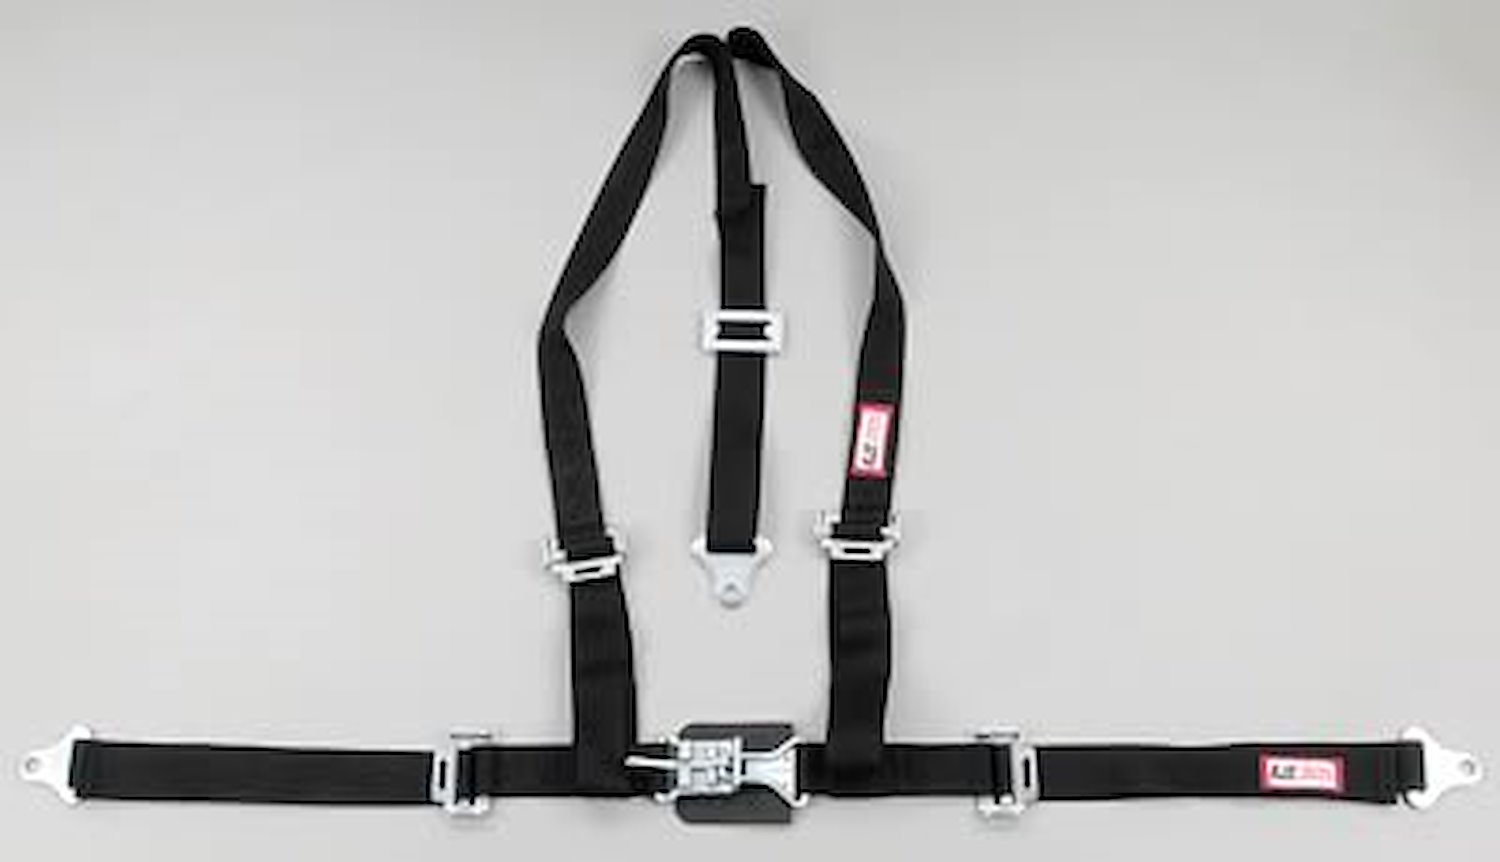 NON-SFI L&L HARNESS 2 PULL UP Lap Belt SNAP SEWN IN 2 S.H. INDIVIDUAL FLOOR Mount WRAP/SNAP ORANGE